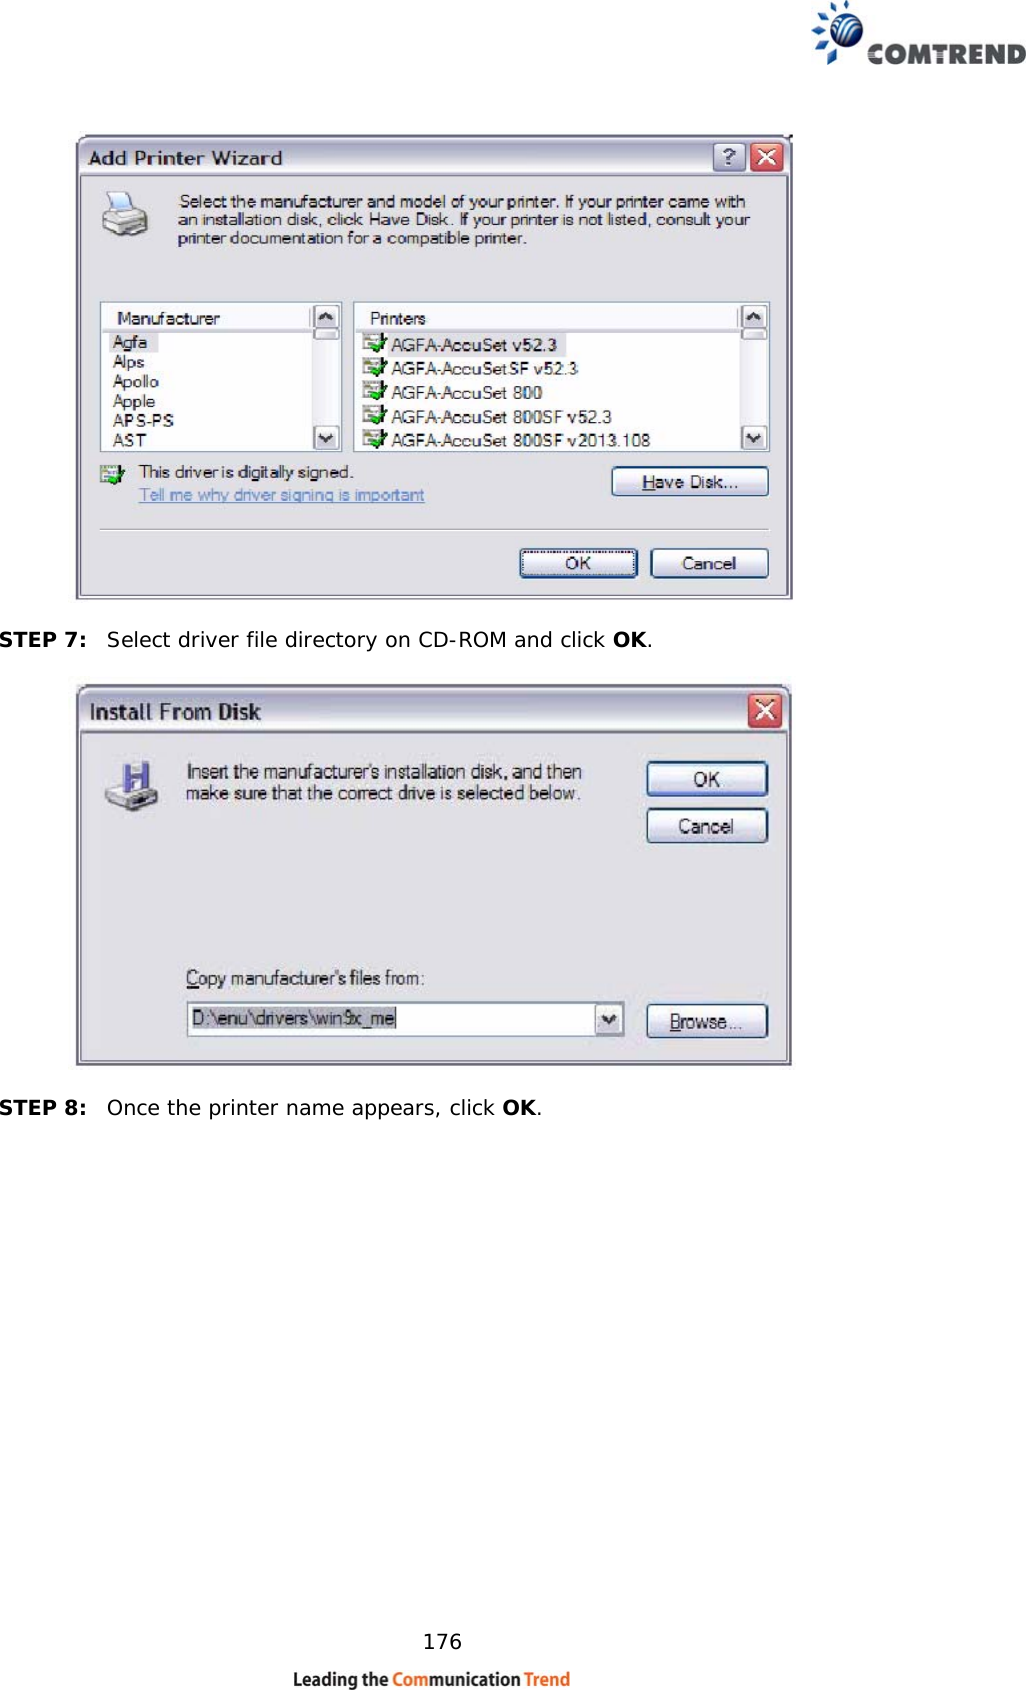    176   STEP 7:  Select driver file directory on CD-ROM and click OK.    STEP 8:  Once the printer name appears, click OK.  